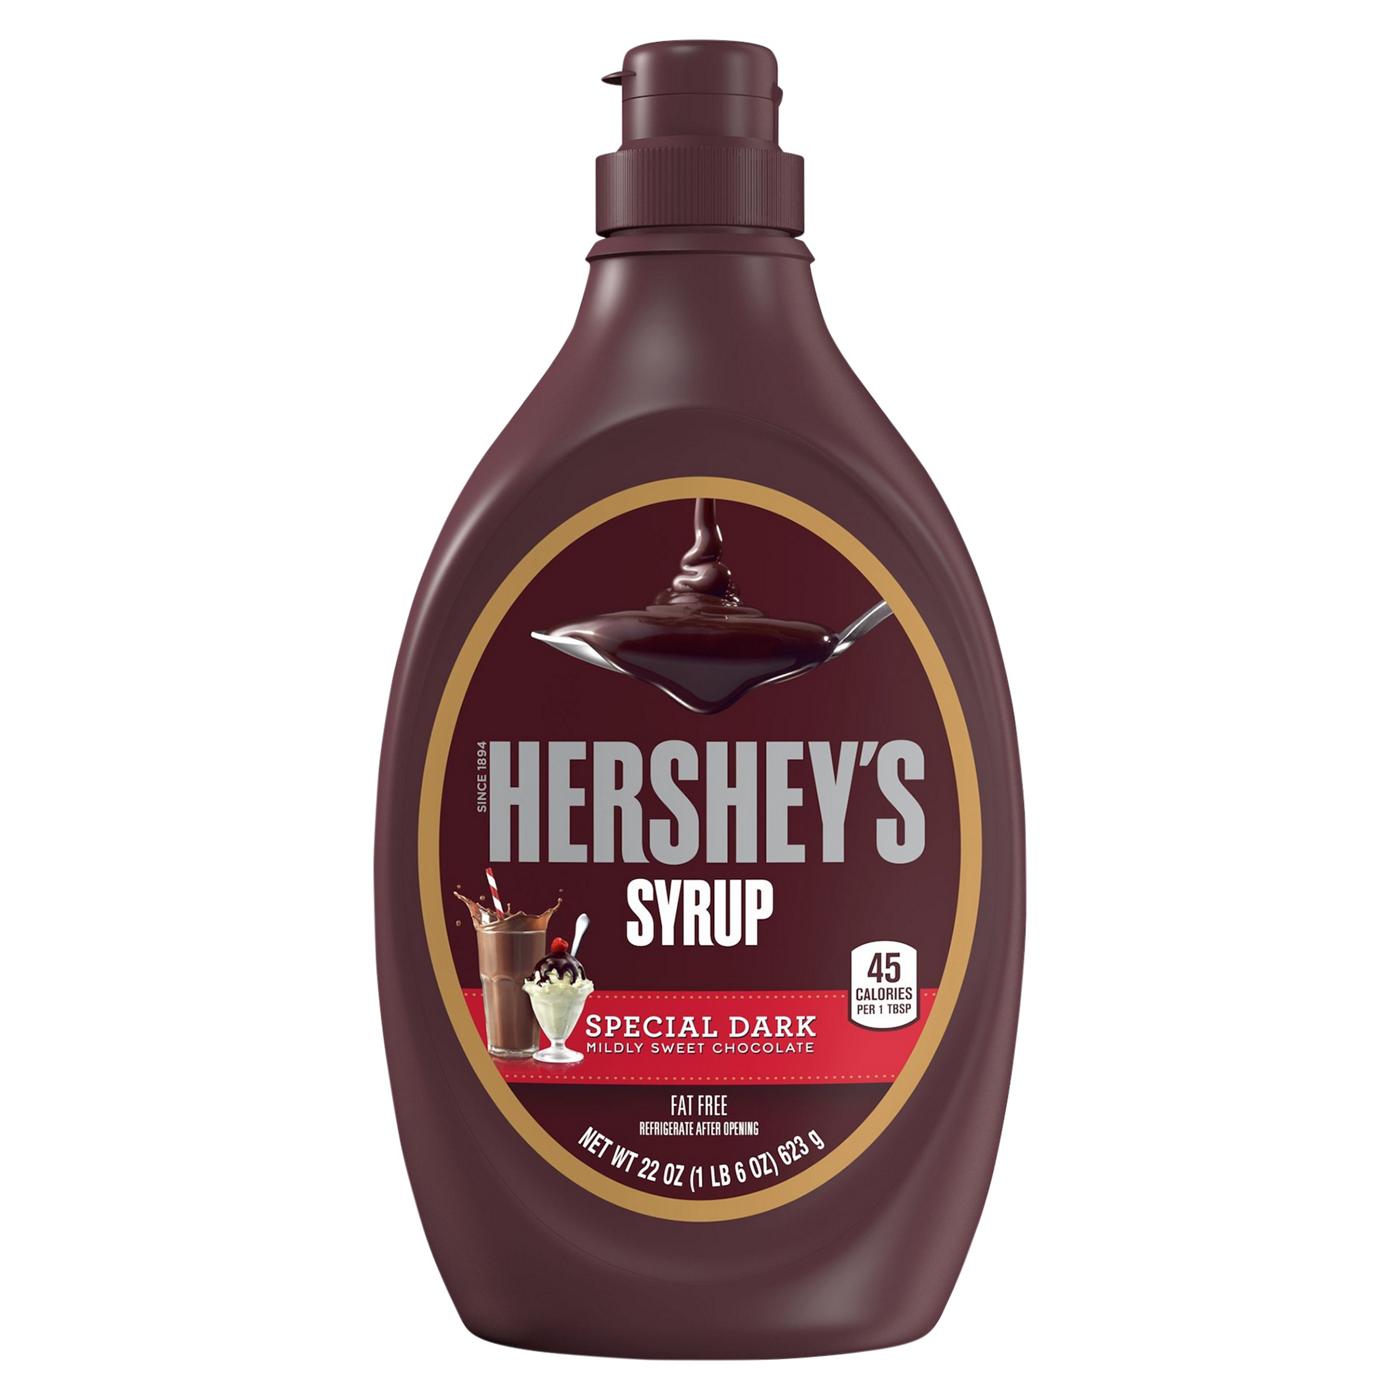 Hershey's Special Dark Chocolate Syrup; image 1 of 6